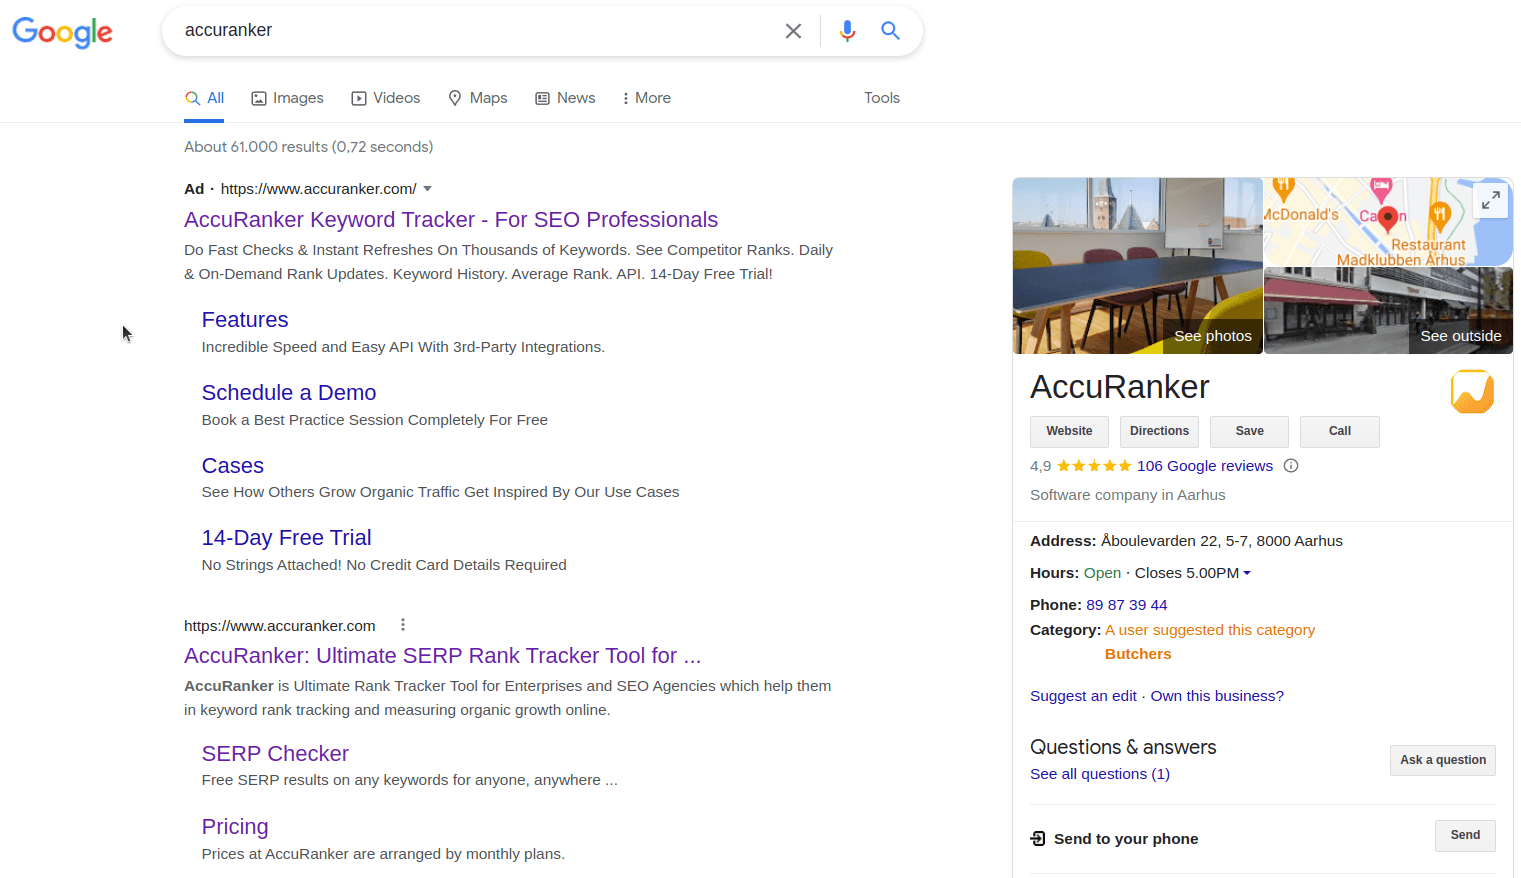 accuranker in google search